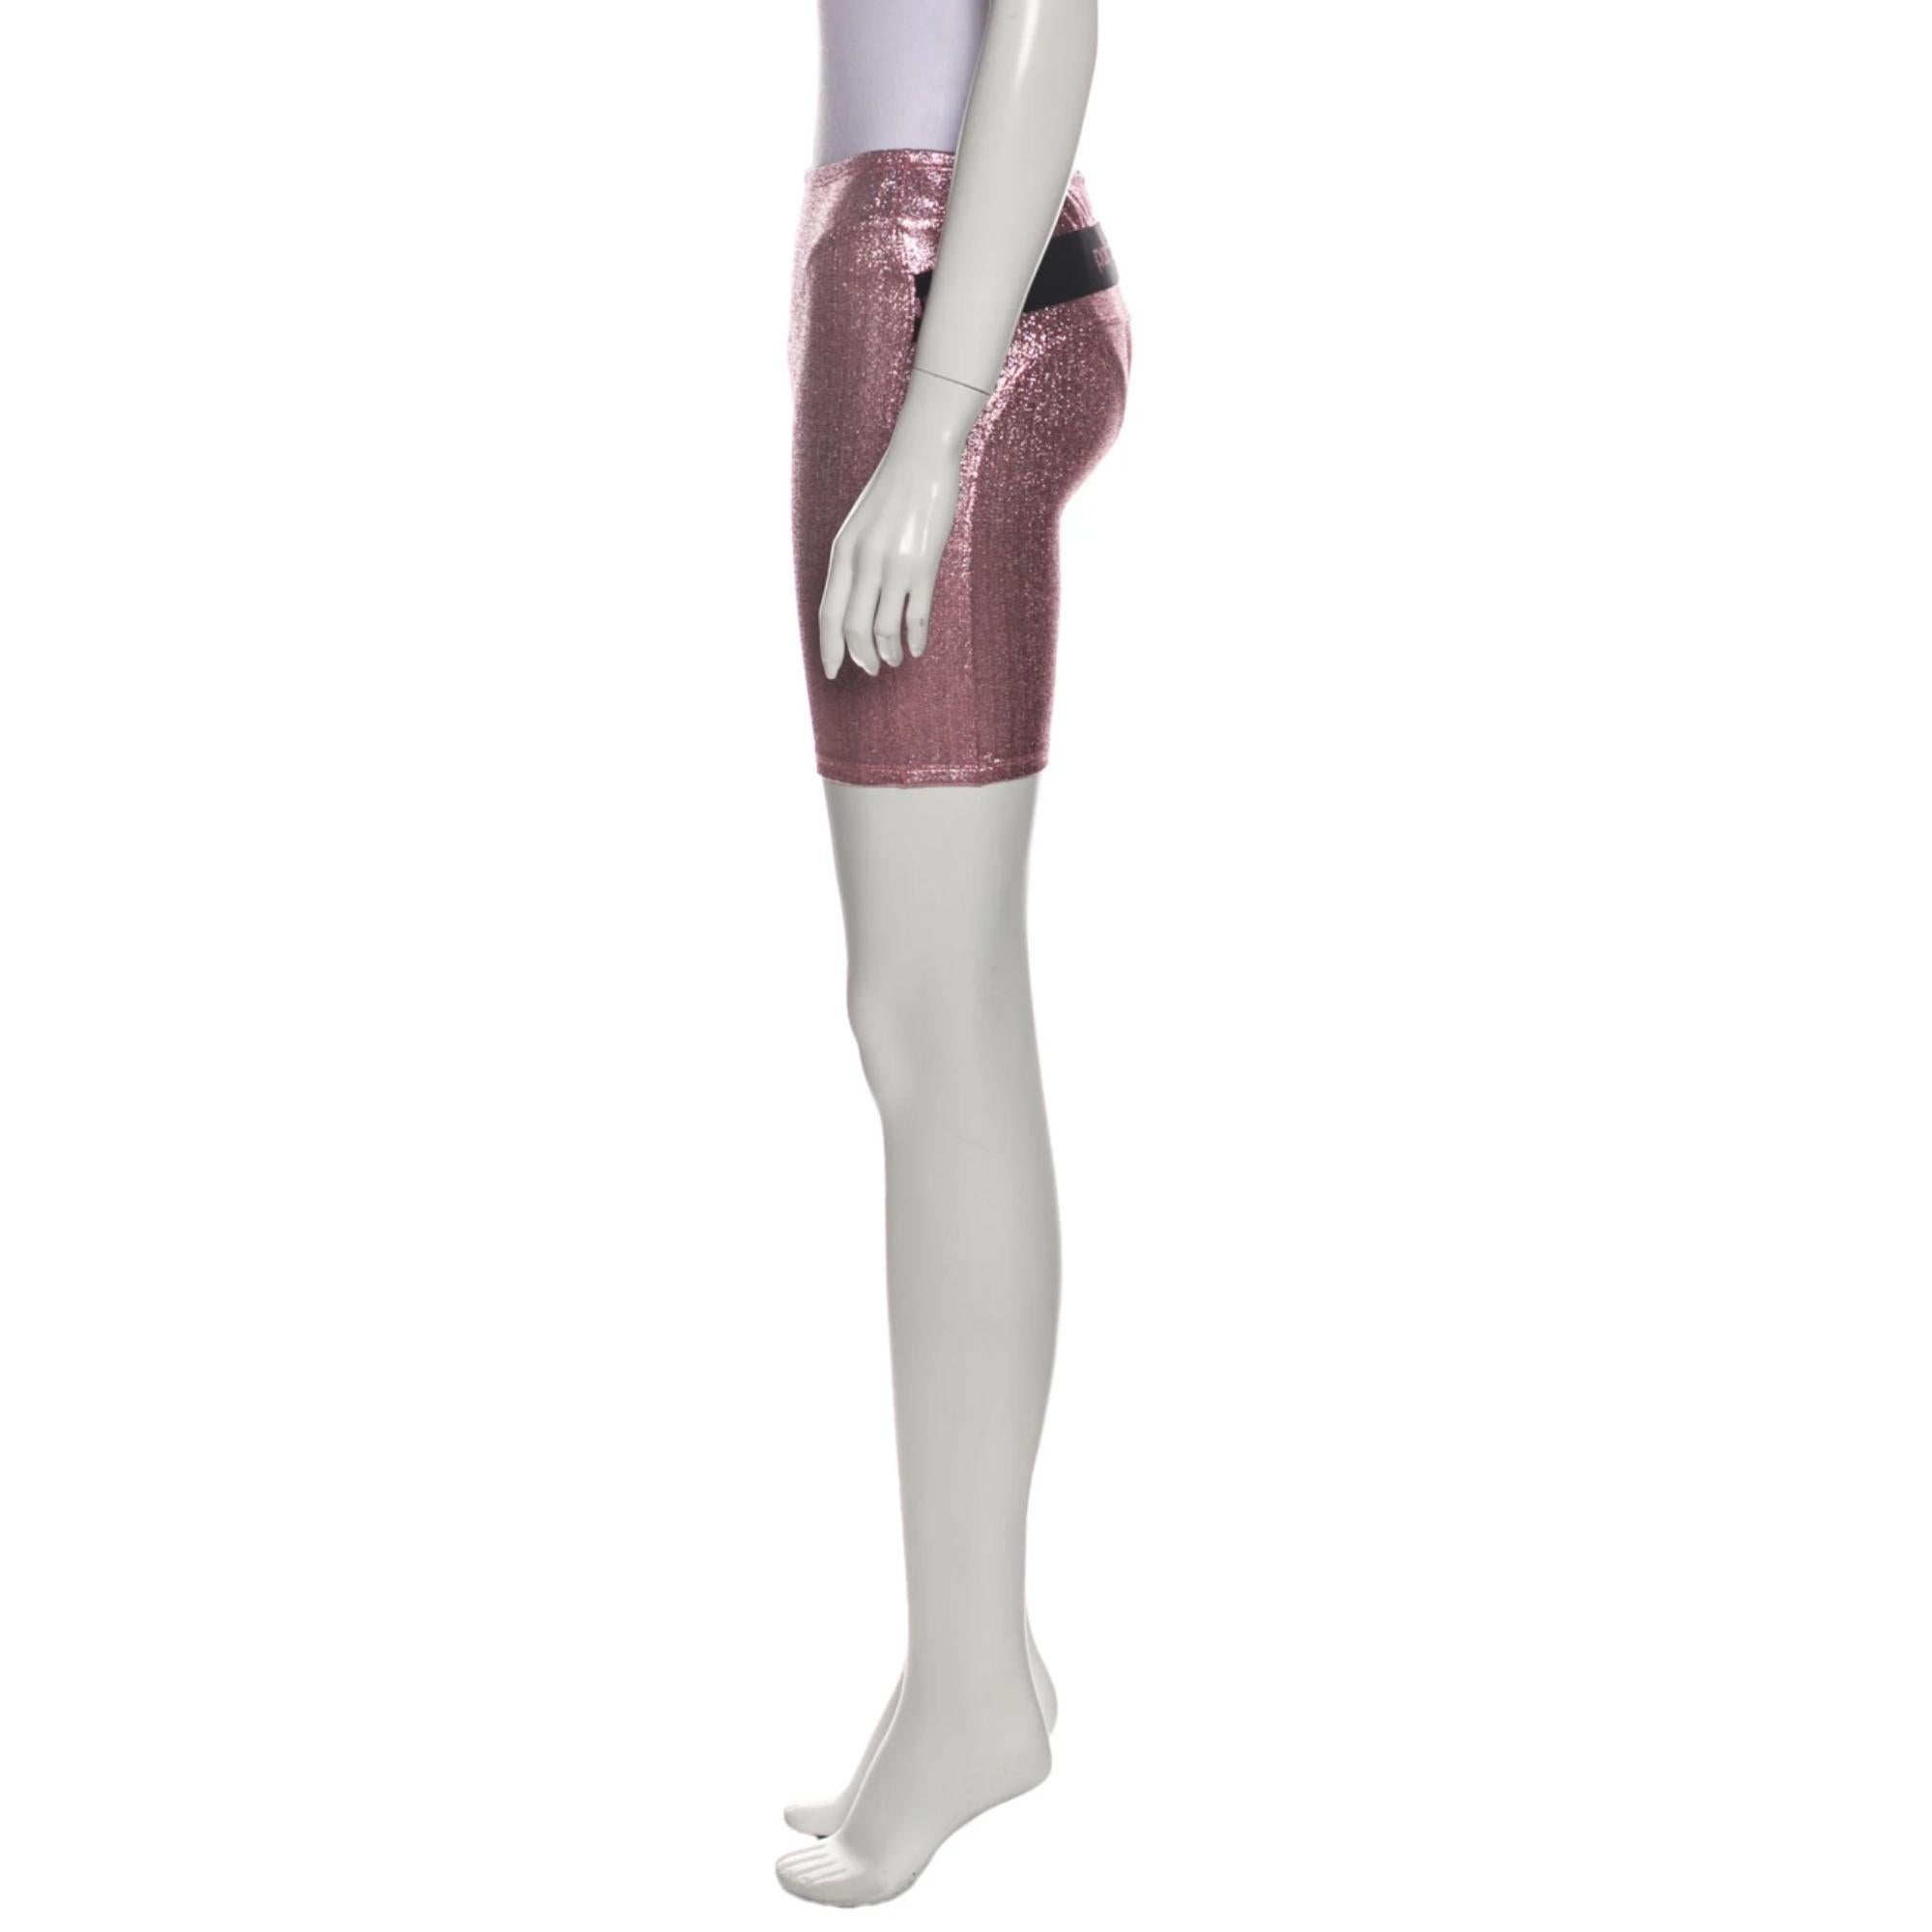 Paco Rabanne Stretch Lurex Jersey shorts. From the Summer 2020 Collection. Pink. Skin tight.

COLOR: Pink
MATERIAL: Not listed, feels like synthetic blend.

SIZE: Size not listed, estimated from measurements.
MEASURES~
Waist: X”
Rise: X”
Inseam: